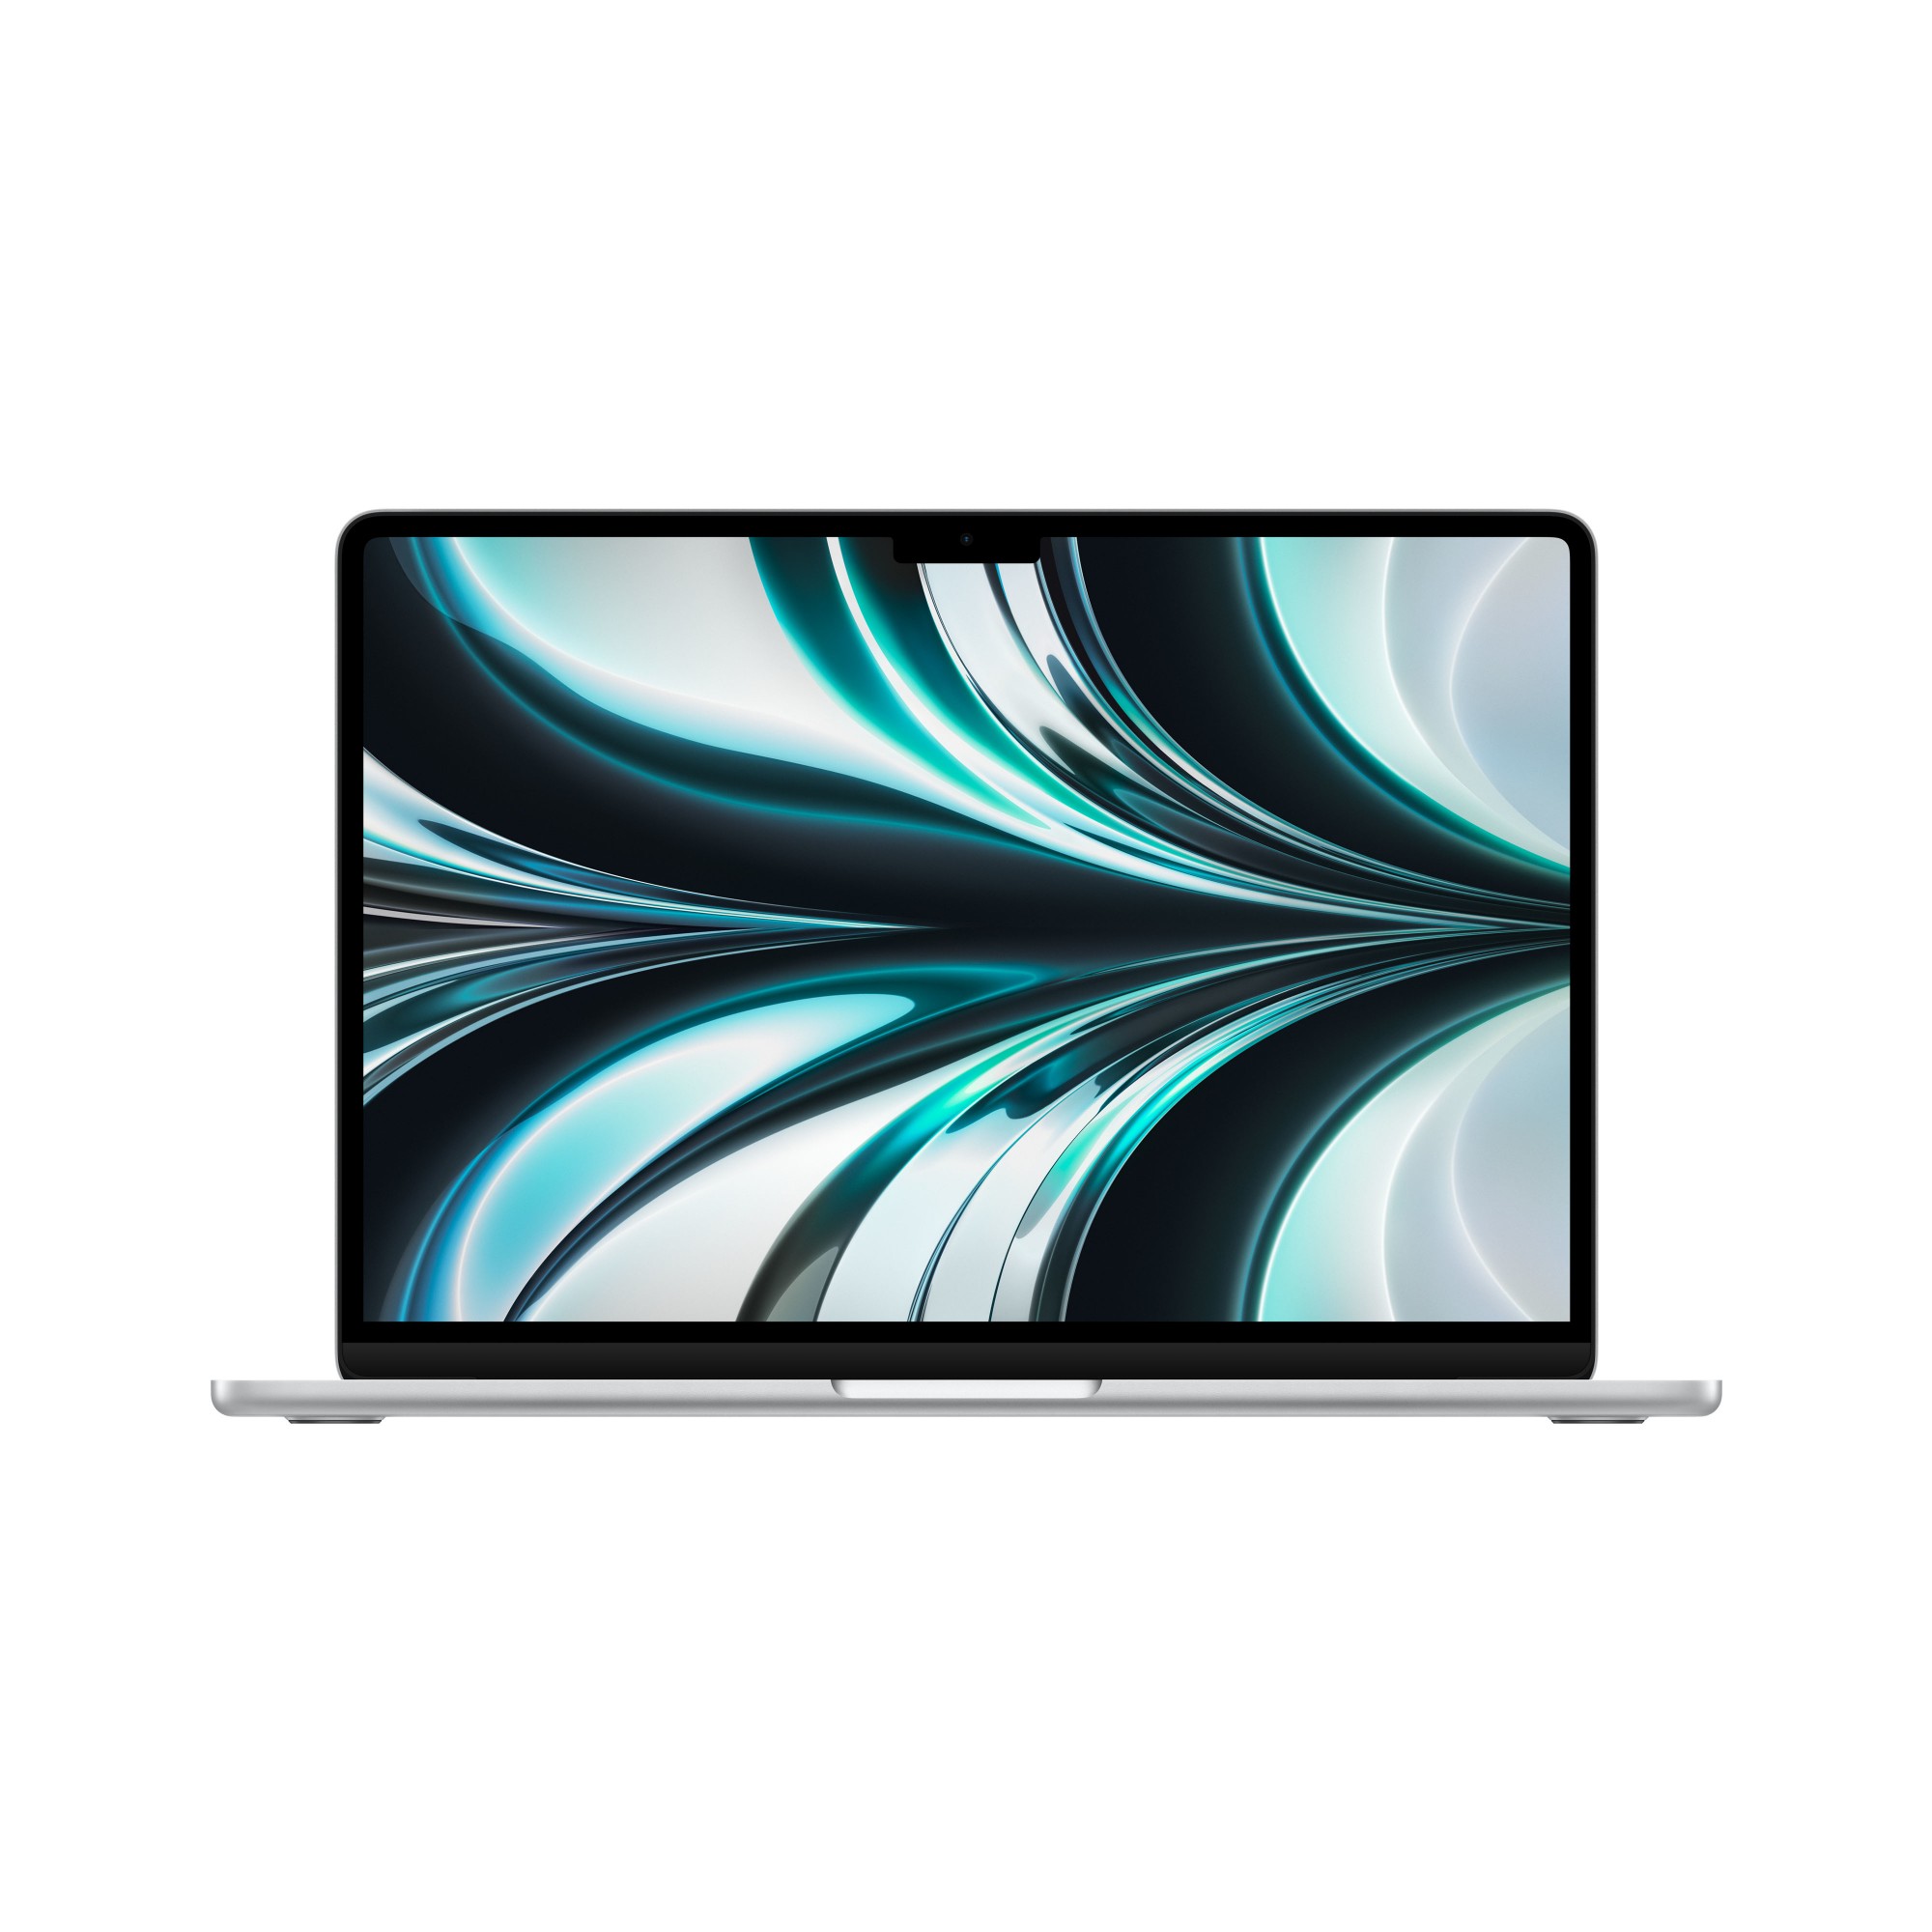 MacBook Air M2, 13", Silver, Apple M2 chip with 8-Core CPU, 10-Core GPU, 16-Core Neural Engine, 8GB unified memory, 512GB SSD storage, Backlit Magic Keyboard - British, 35W Dual USB-C Port Power Adapter UK Power Supply